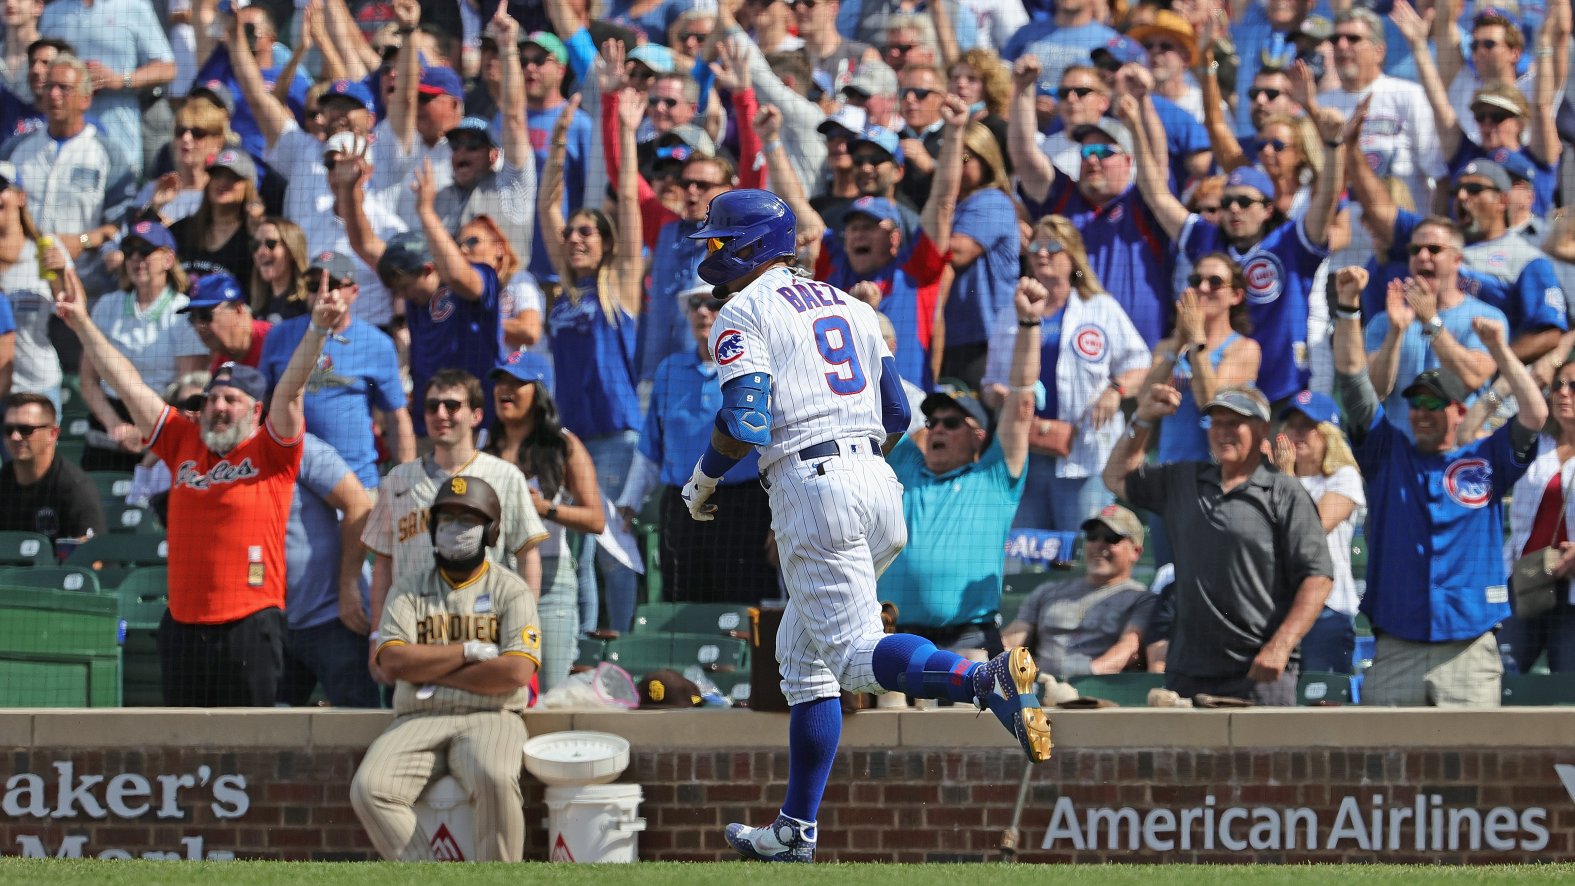 Cubs to Hold ‘Opening Day 2.0’ With Hall of Famers, Bill Murray Here’s